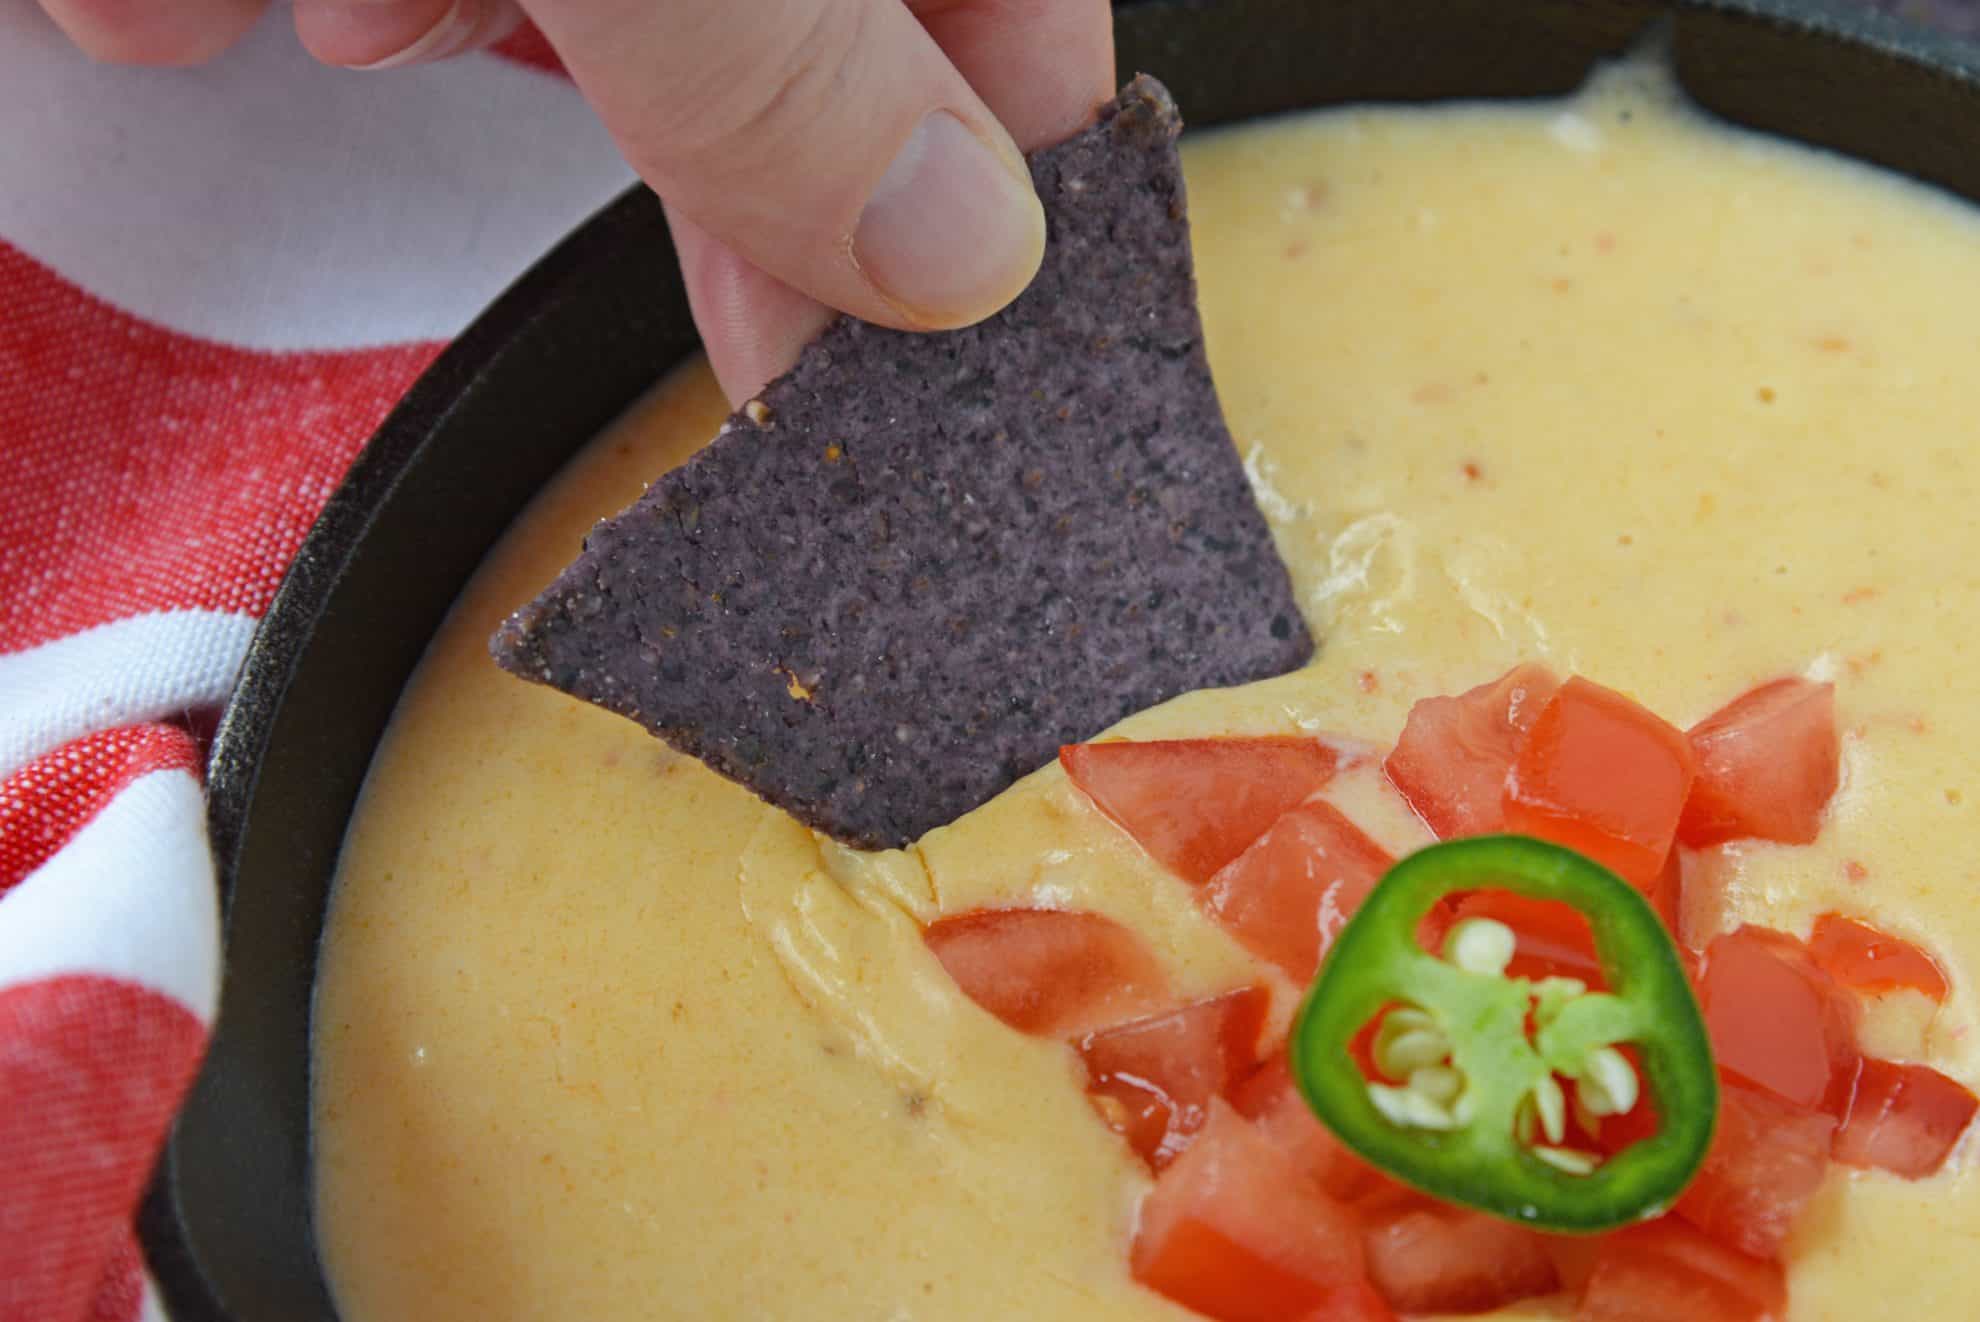 Chip dipping into Mexican queso sauce